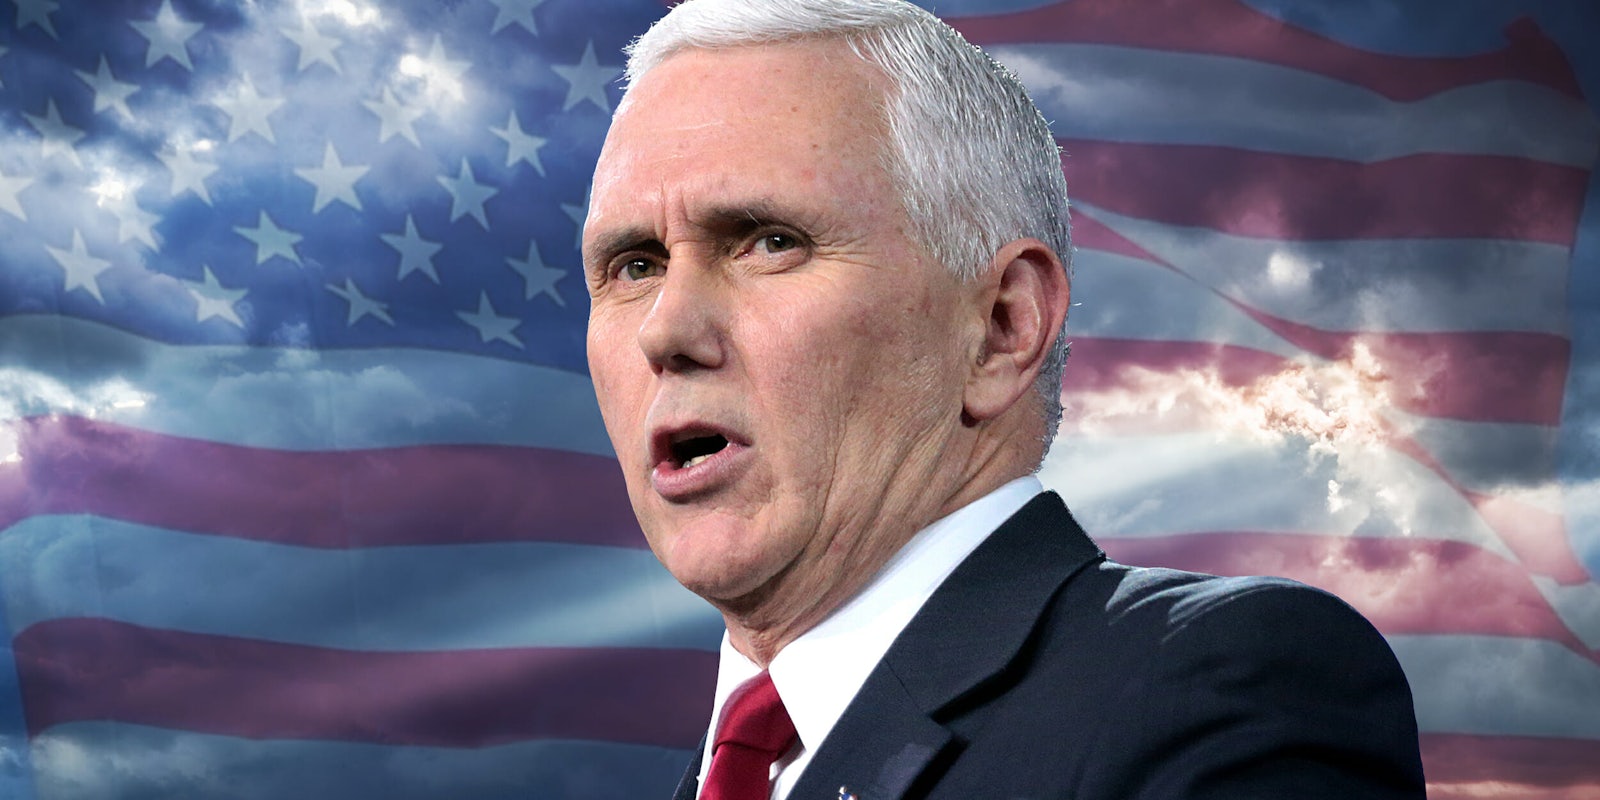 Mike Pence in front of sunbeam and American flag